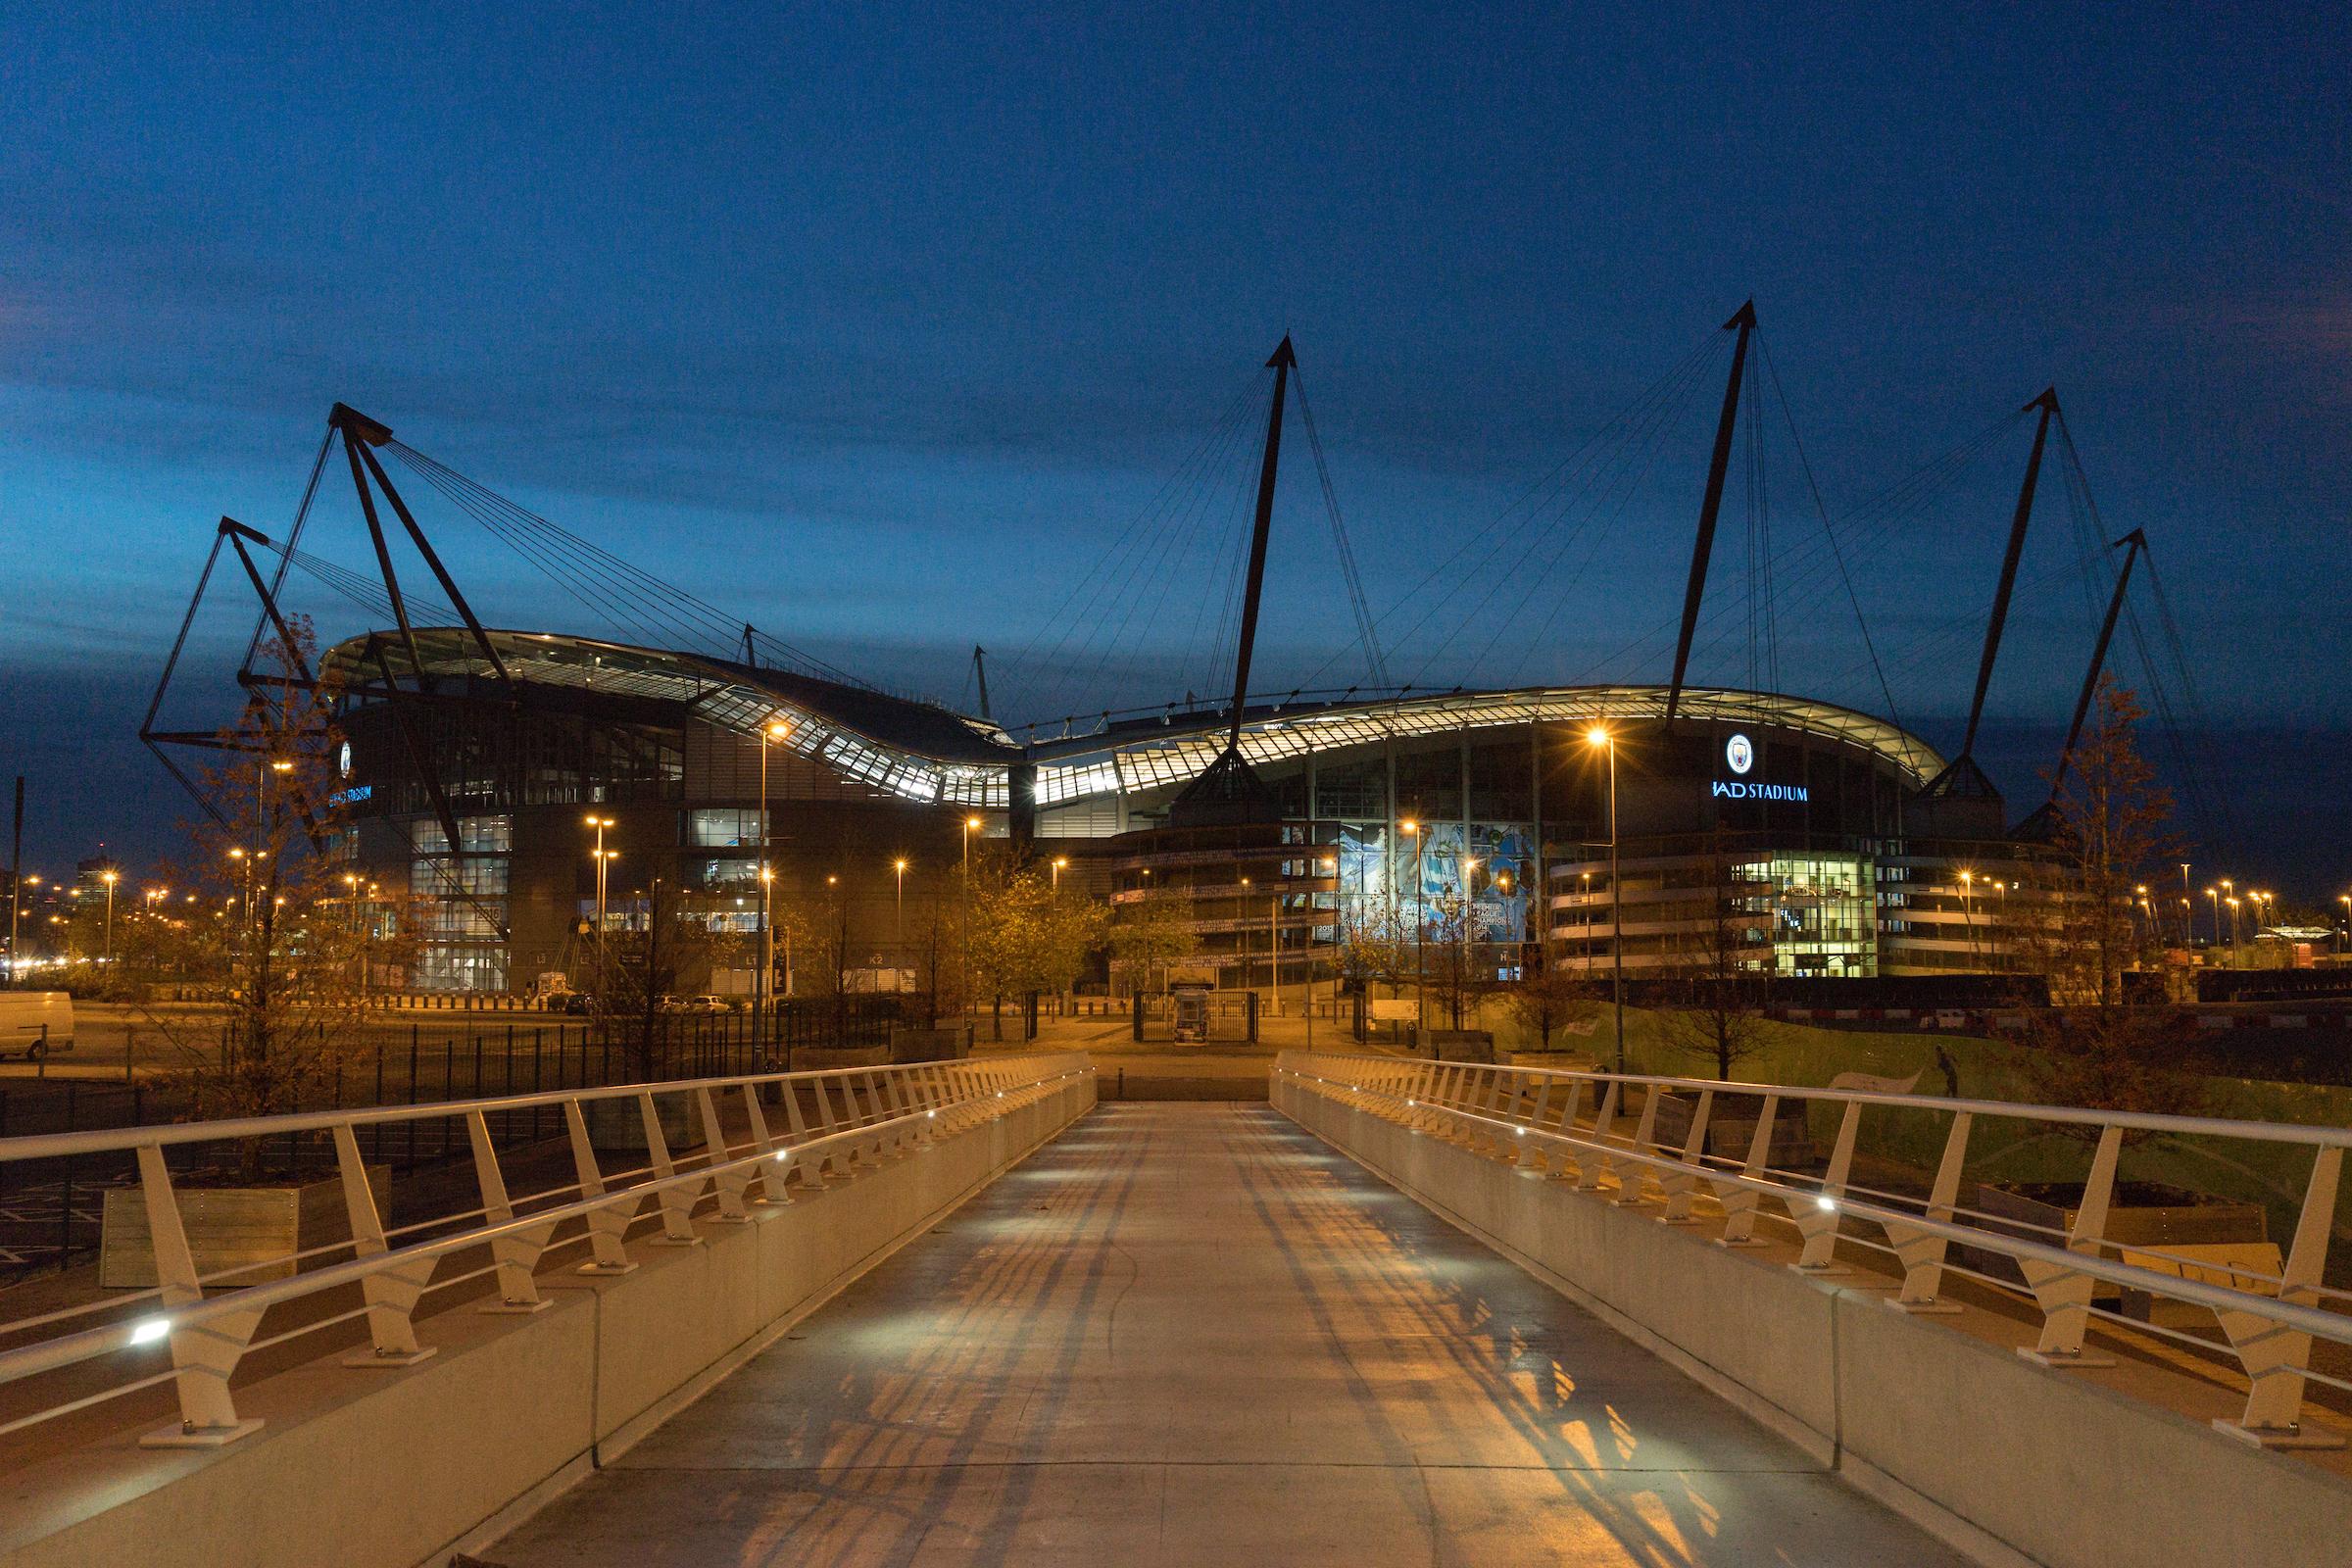 The Etihad Stadium, Manchester City Football Club, Manchester, 93:20 East / Central / West photo #1